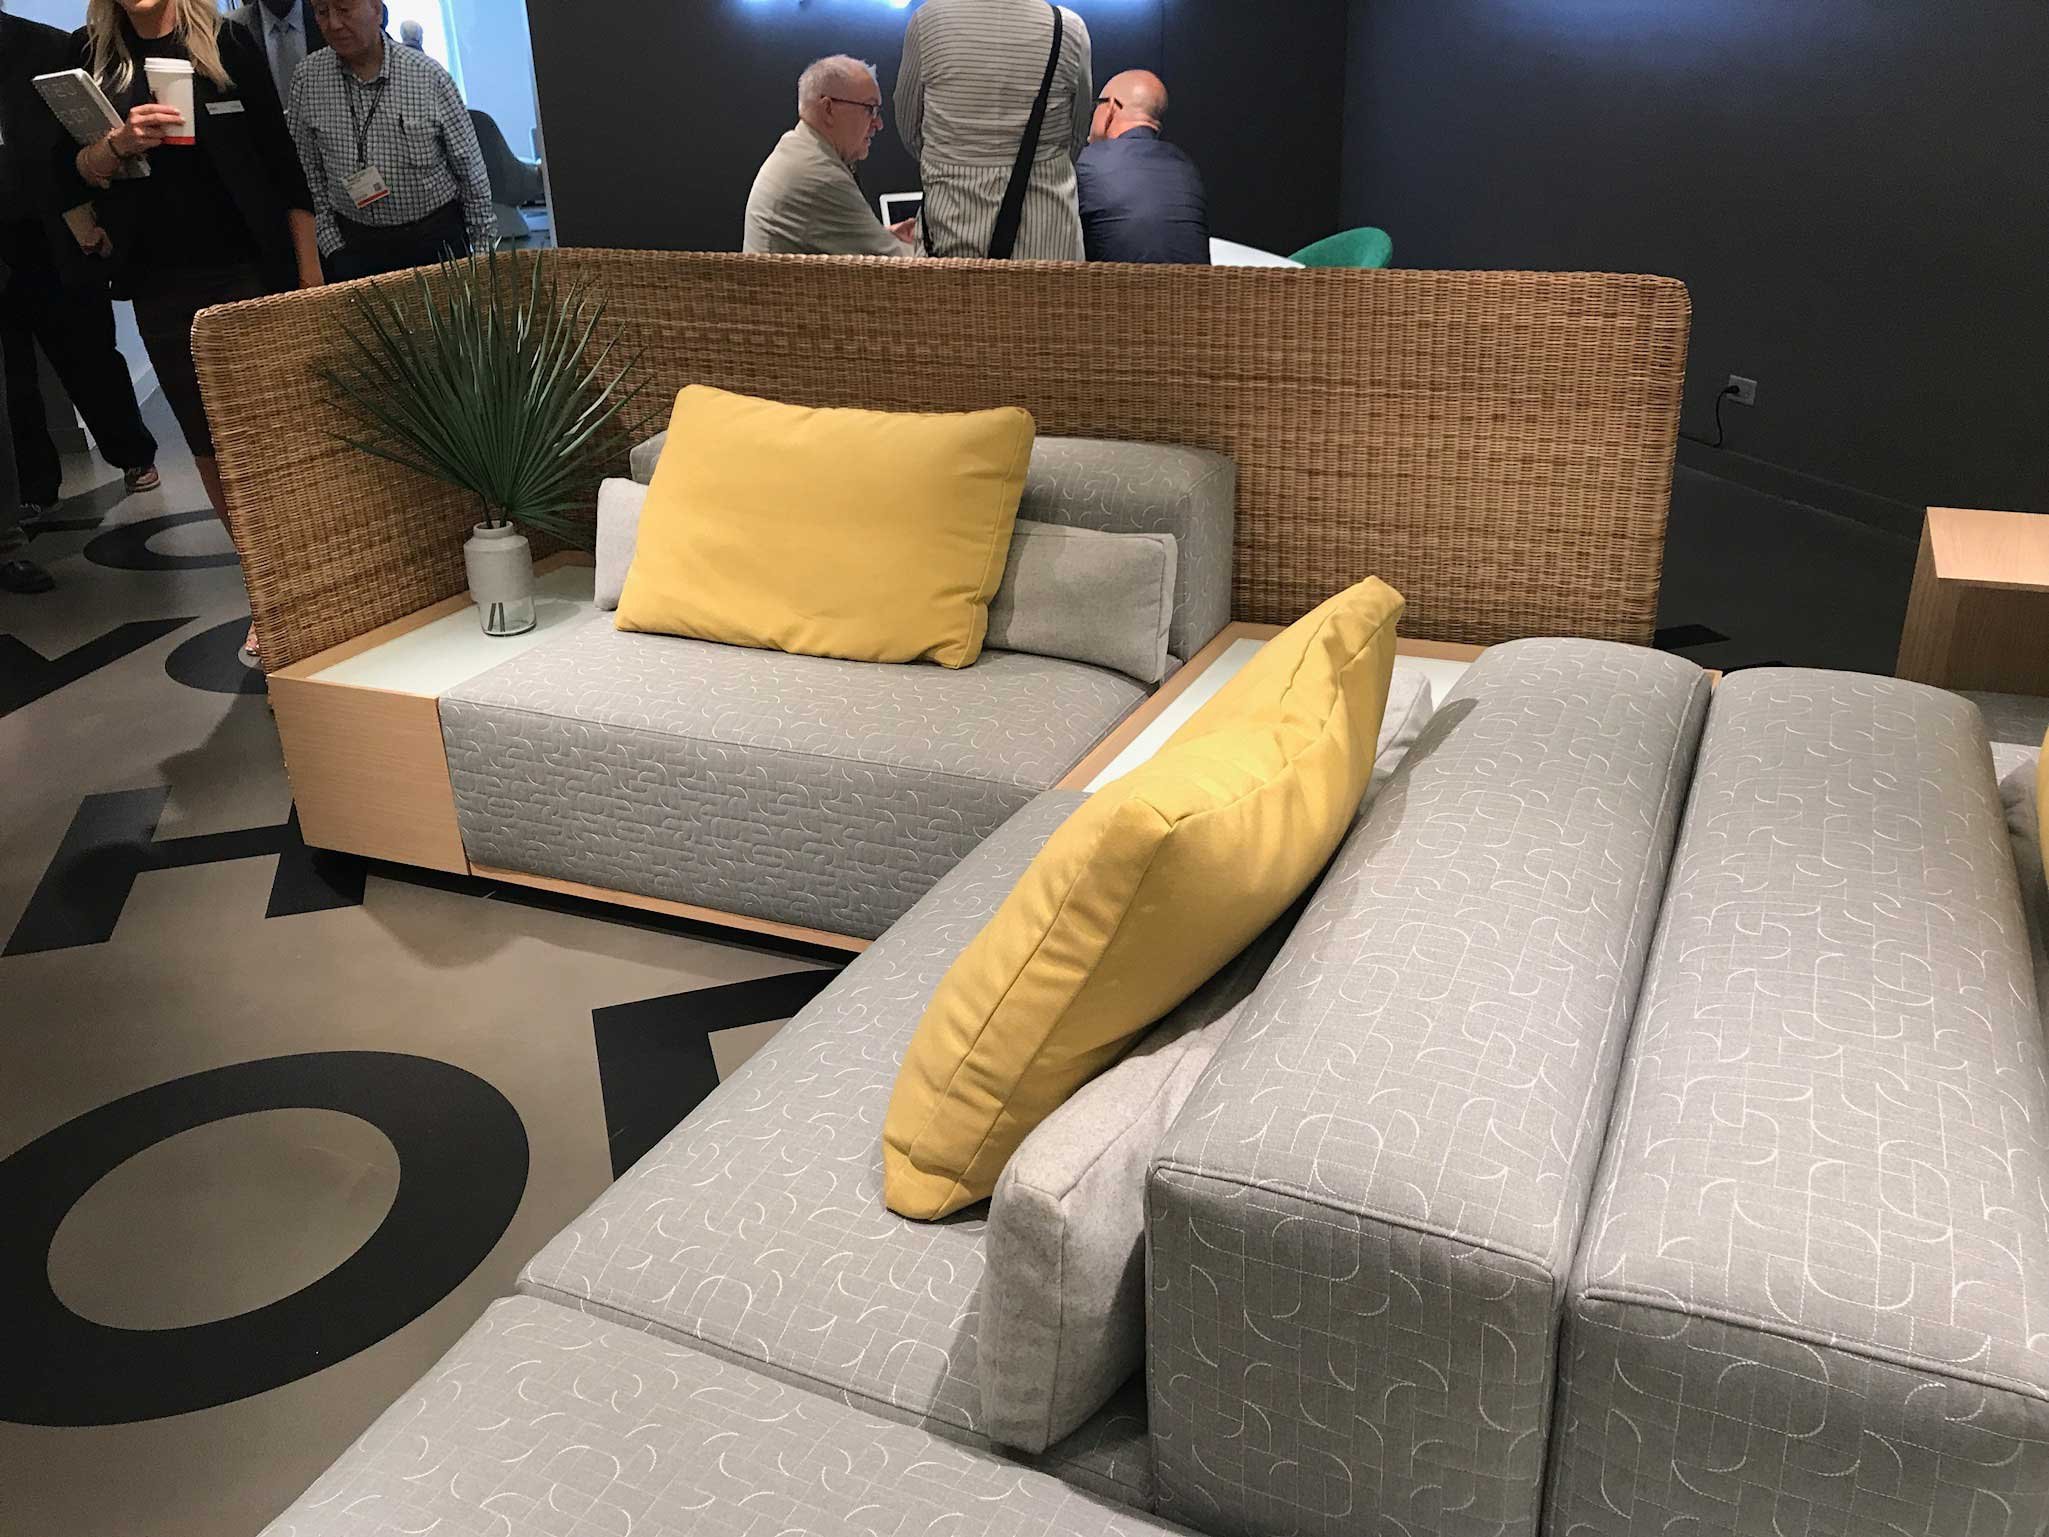 5 Trends We Saw at NeoCon 2018 from Unisource Solutions - 4 texture